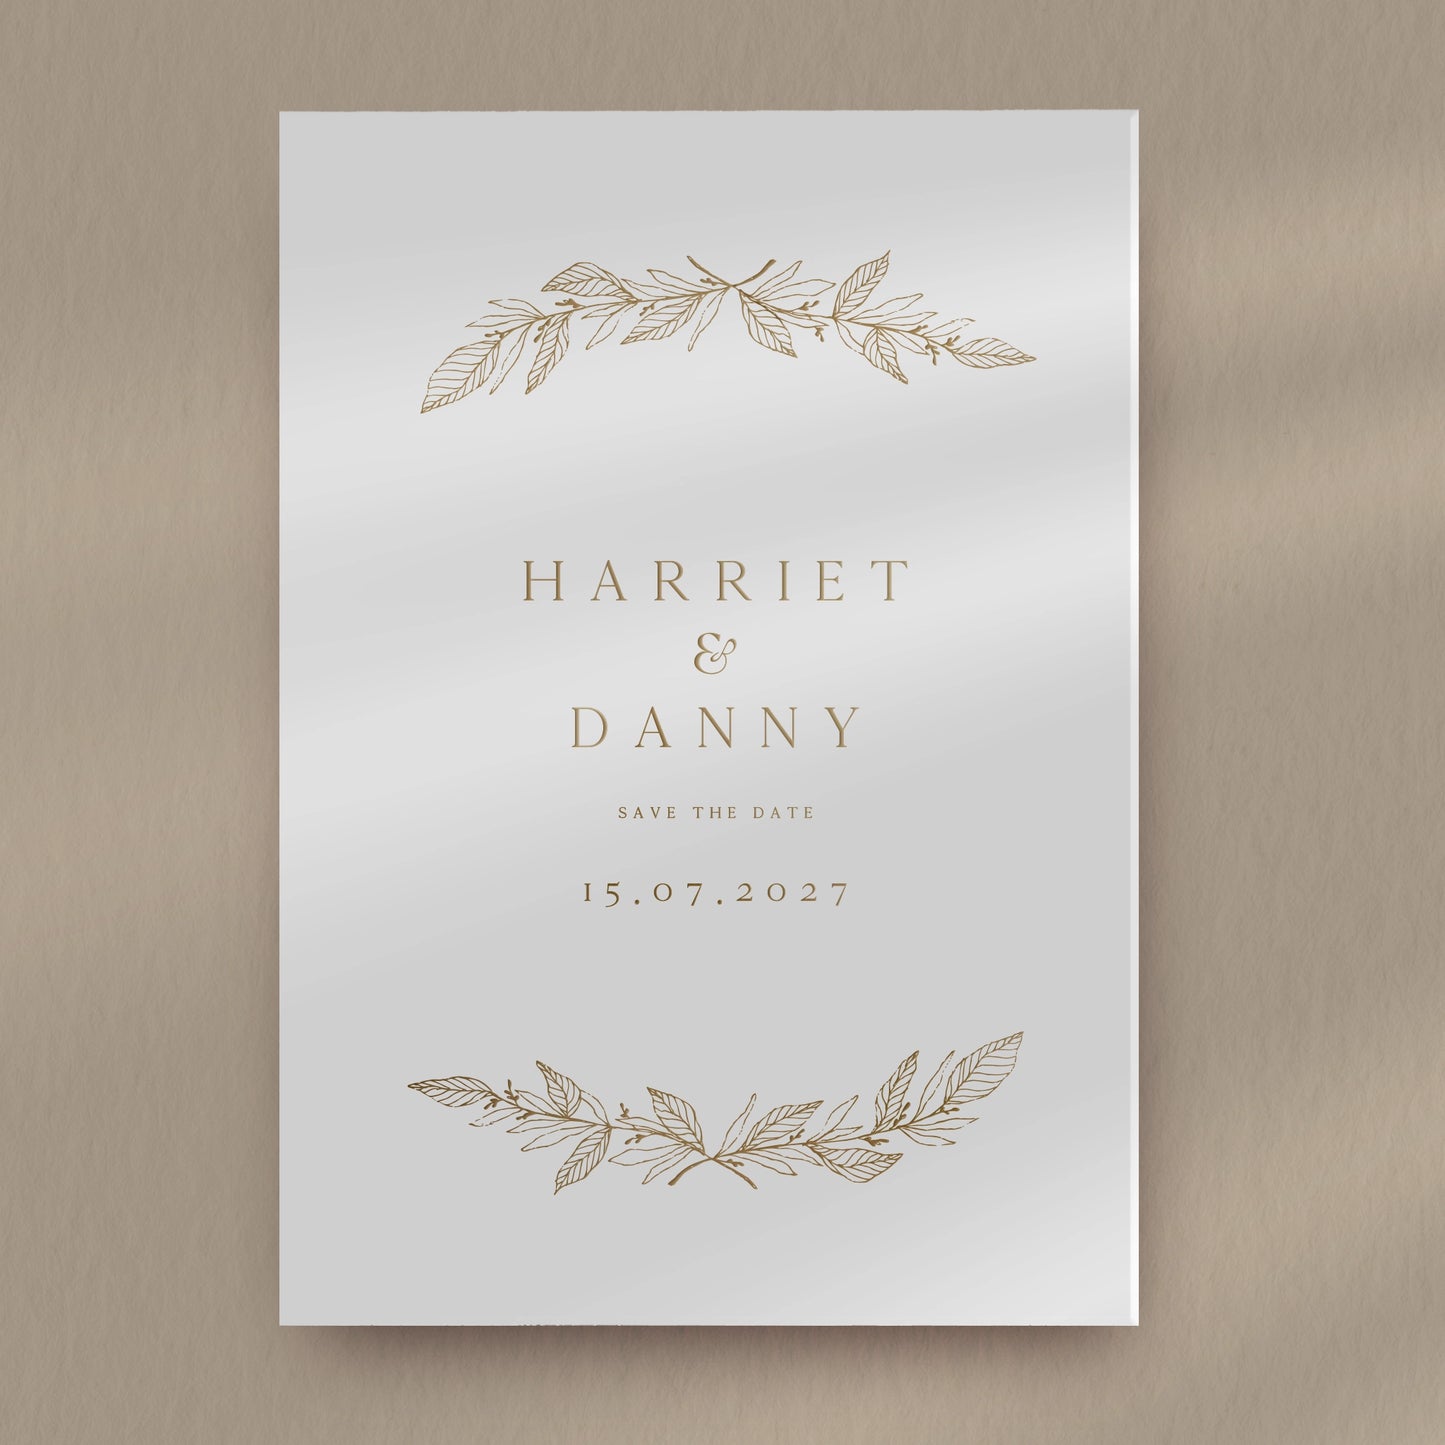 Save The Date Sample  Ivy and Gold Wedding Stationery Harriet  